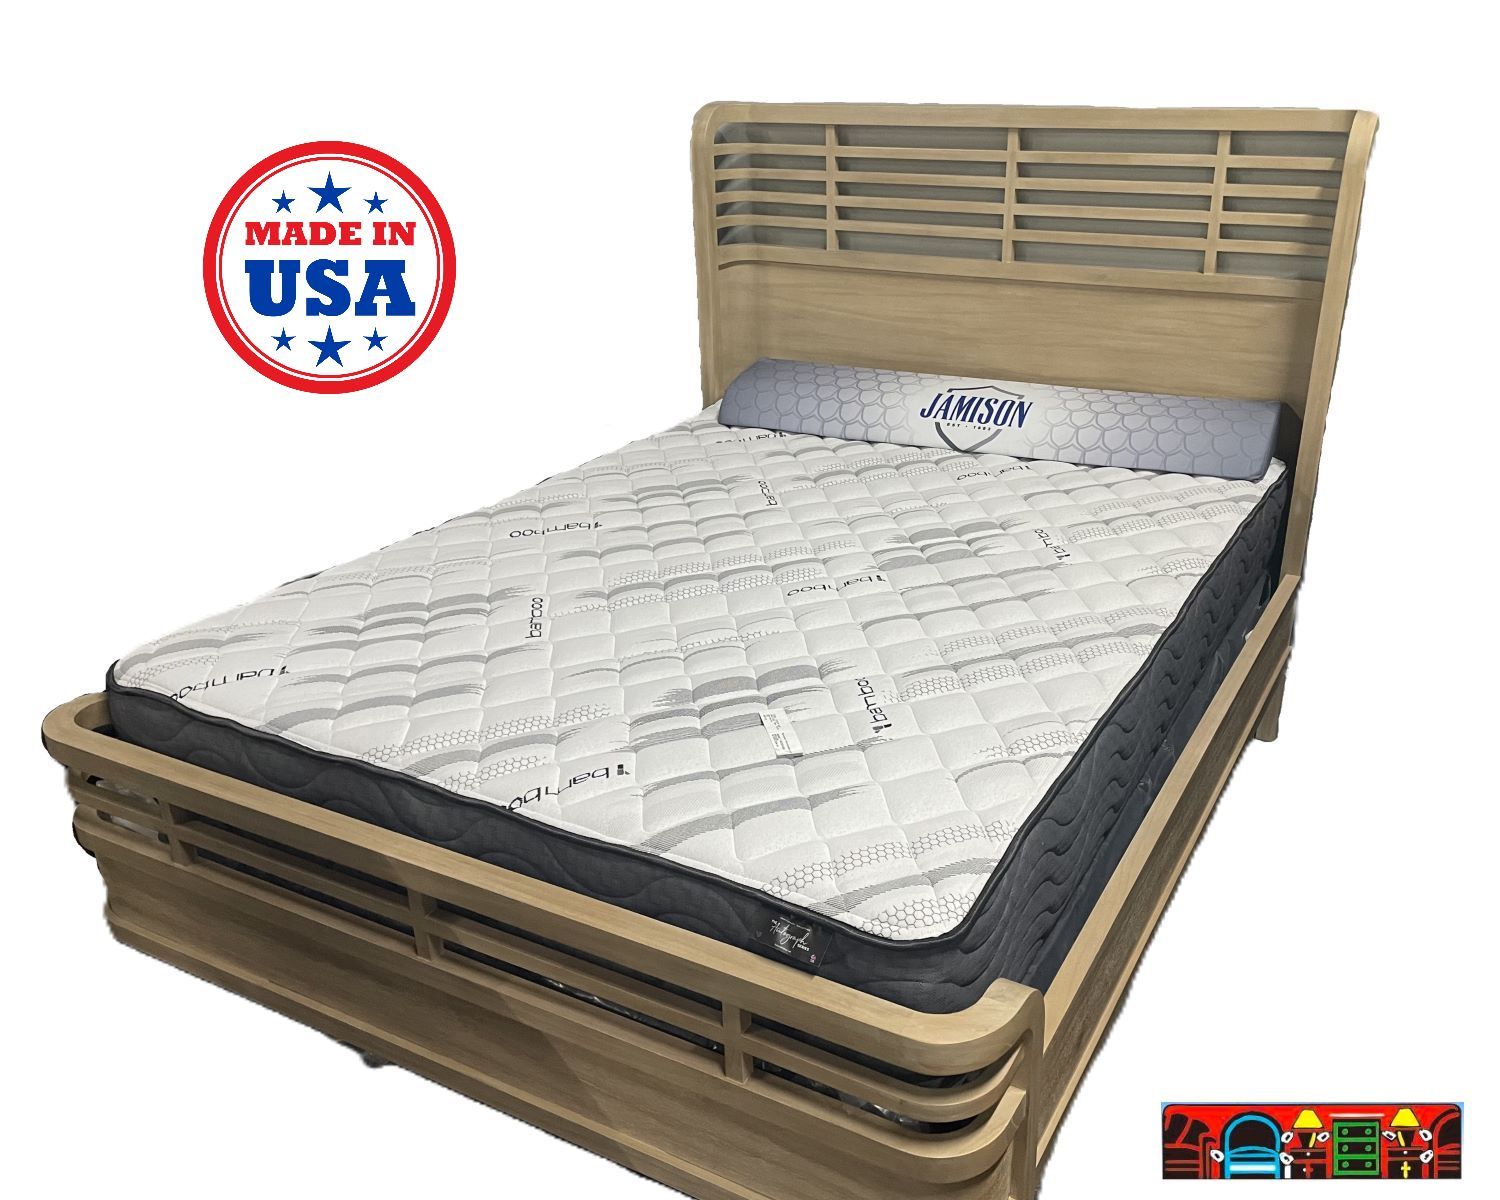 The Jamison Autograph Series Liberty Park firm mattress is available at Bratz-CFW in Fort Myers, FL.